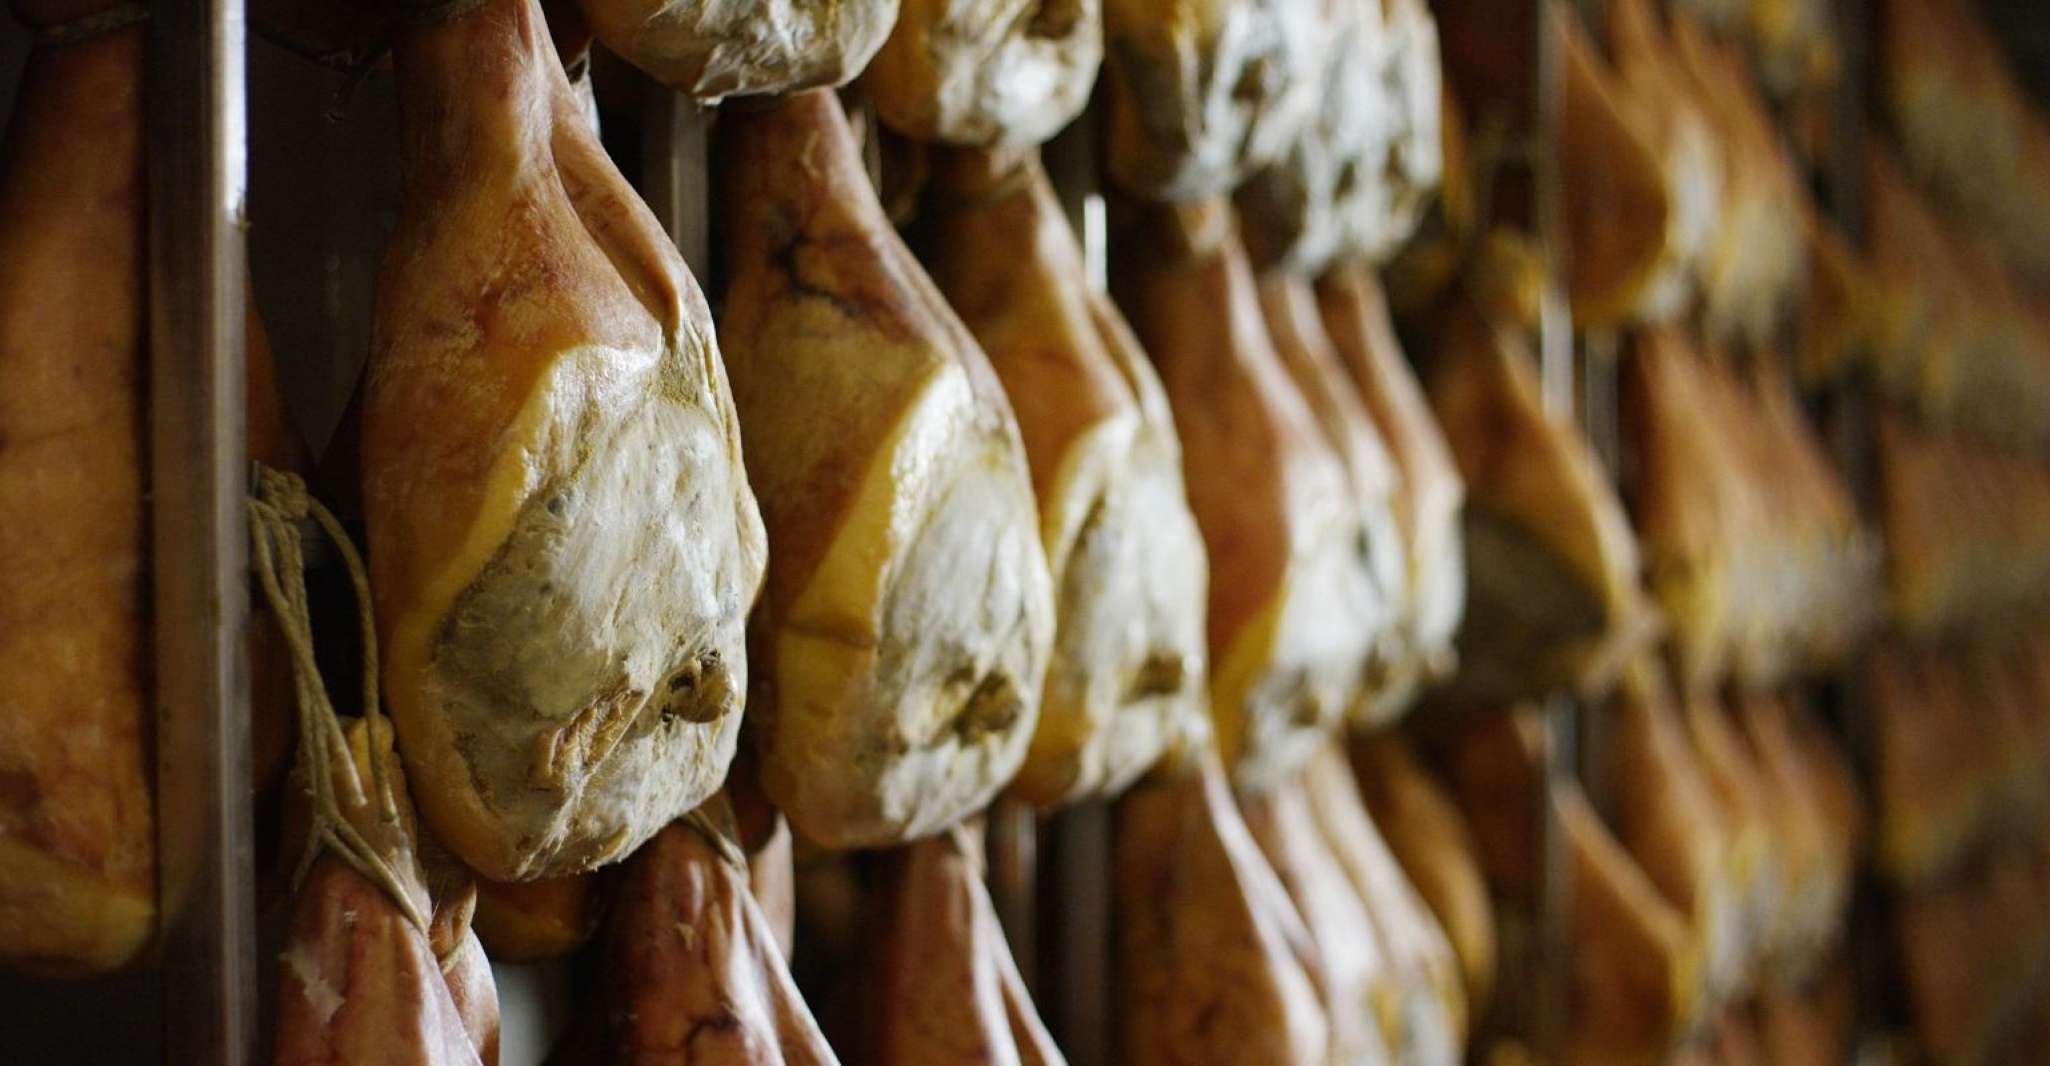 From Parma, Parmigiano and Parma Ham Guided Food Tour - Housity